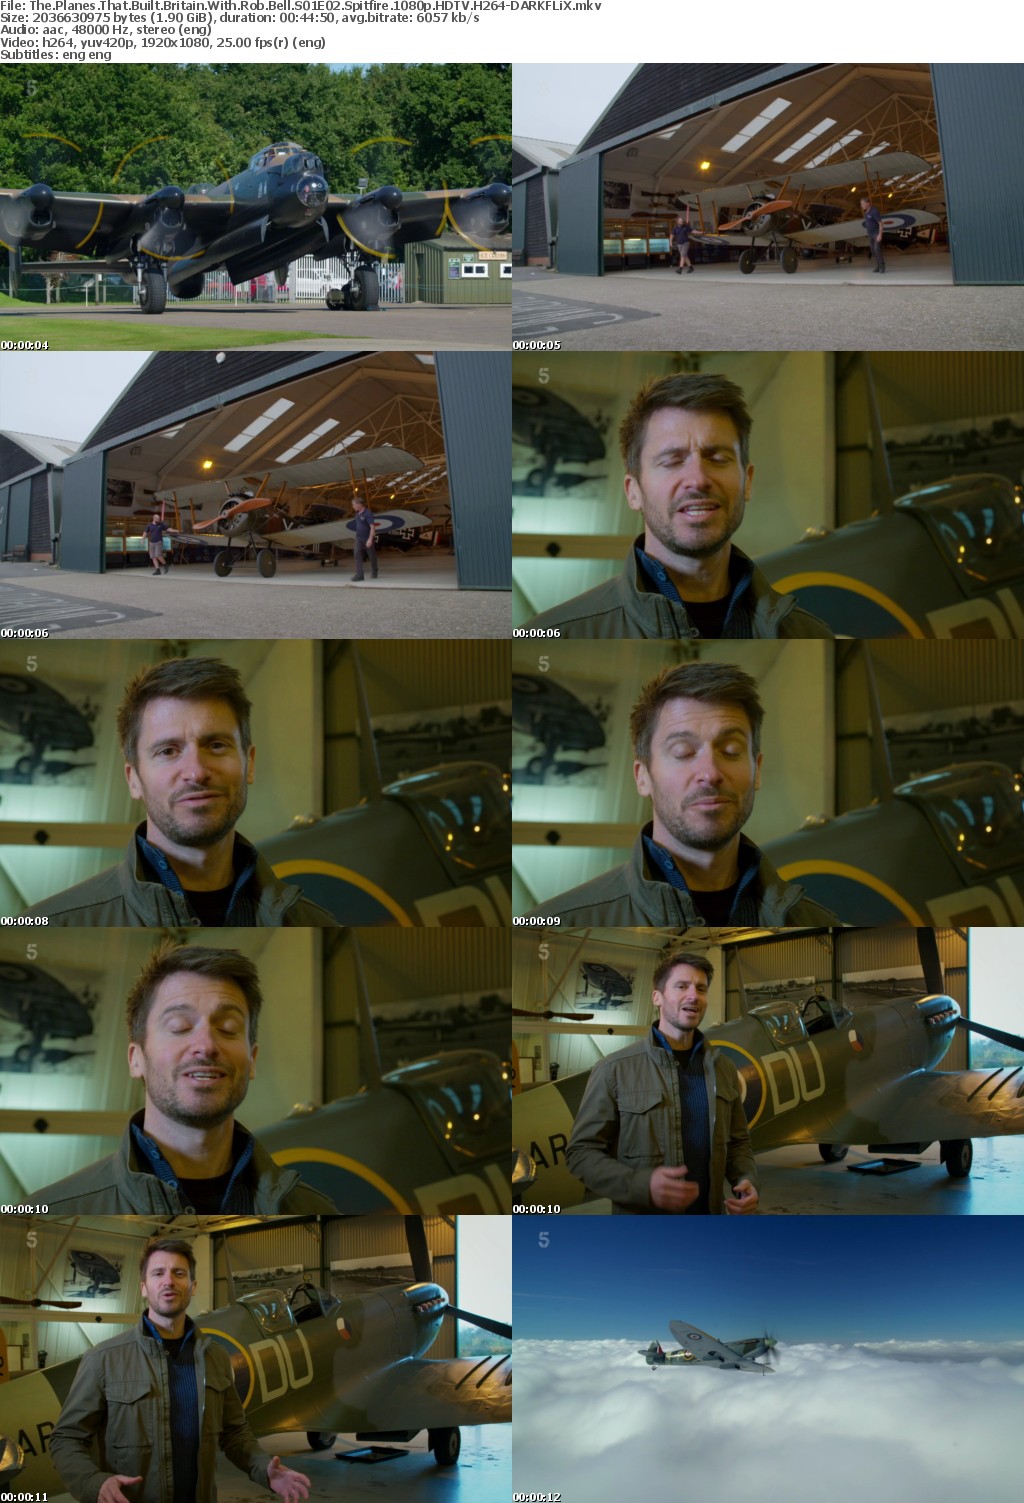 The Planes That Built Britain With Rob Bell S01E02 Spitfire 1080p HDTV H264-DARKFLiX